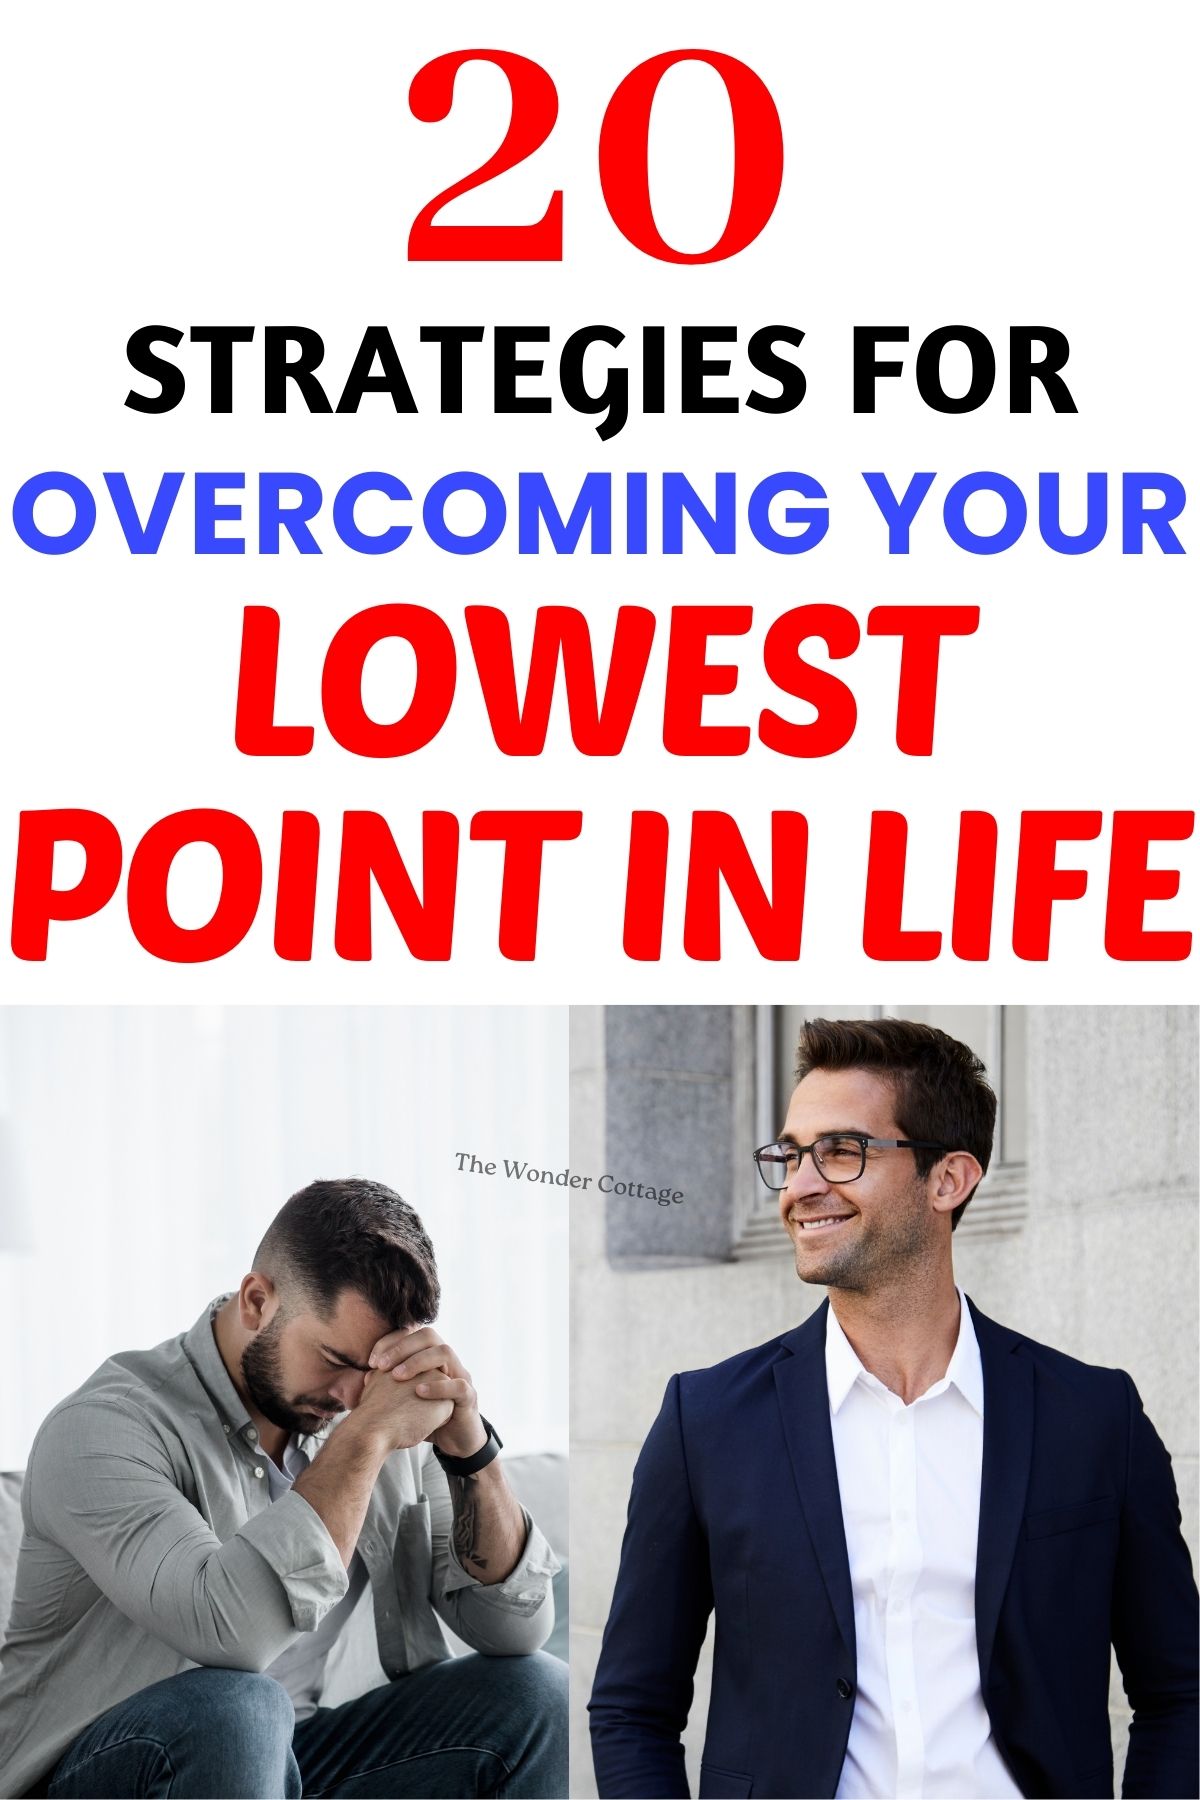 20 Strategies For Overcoming Your Lowest Point In Life